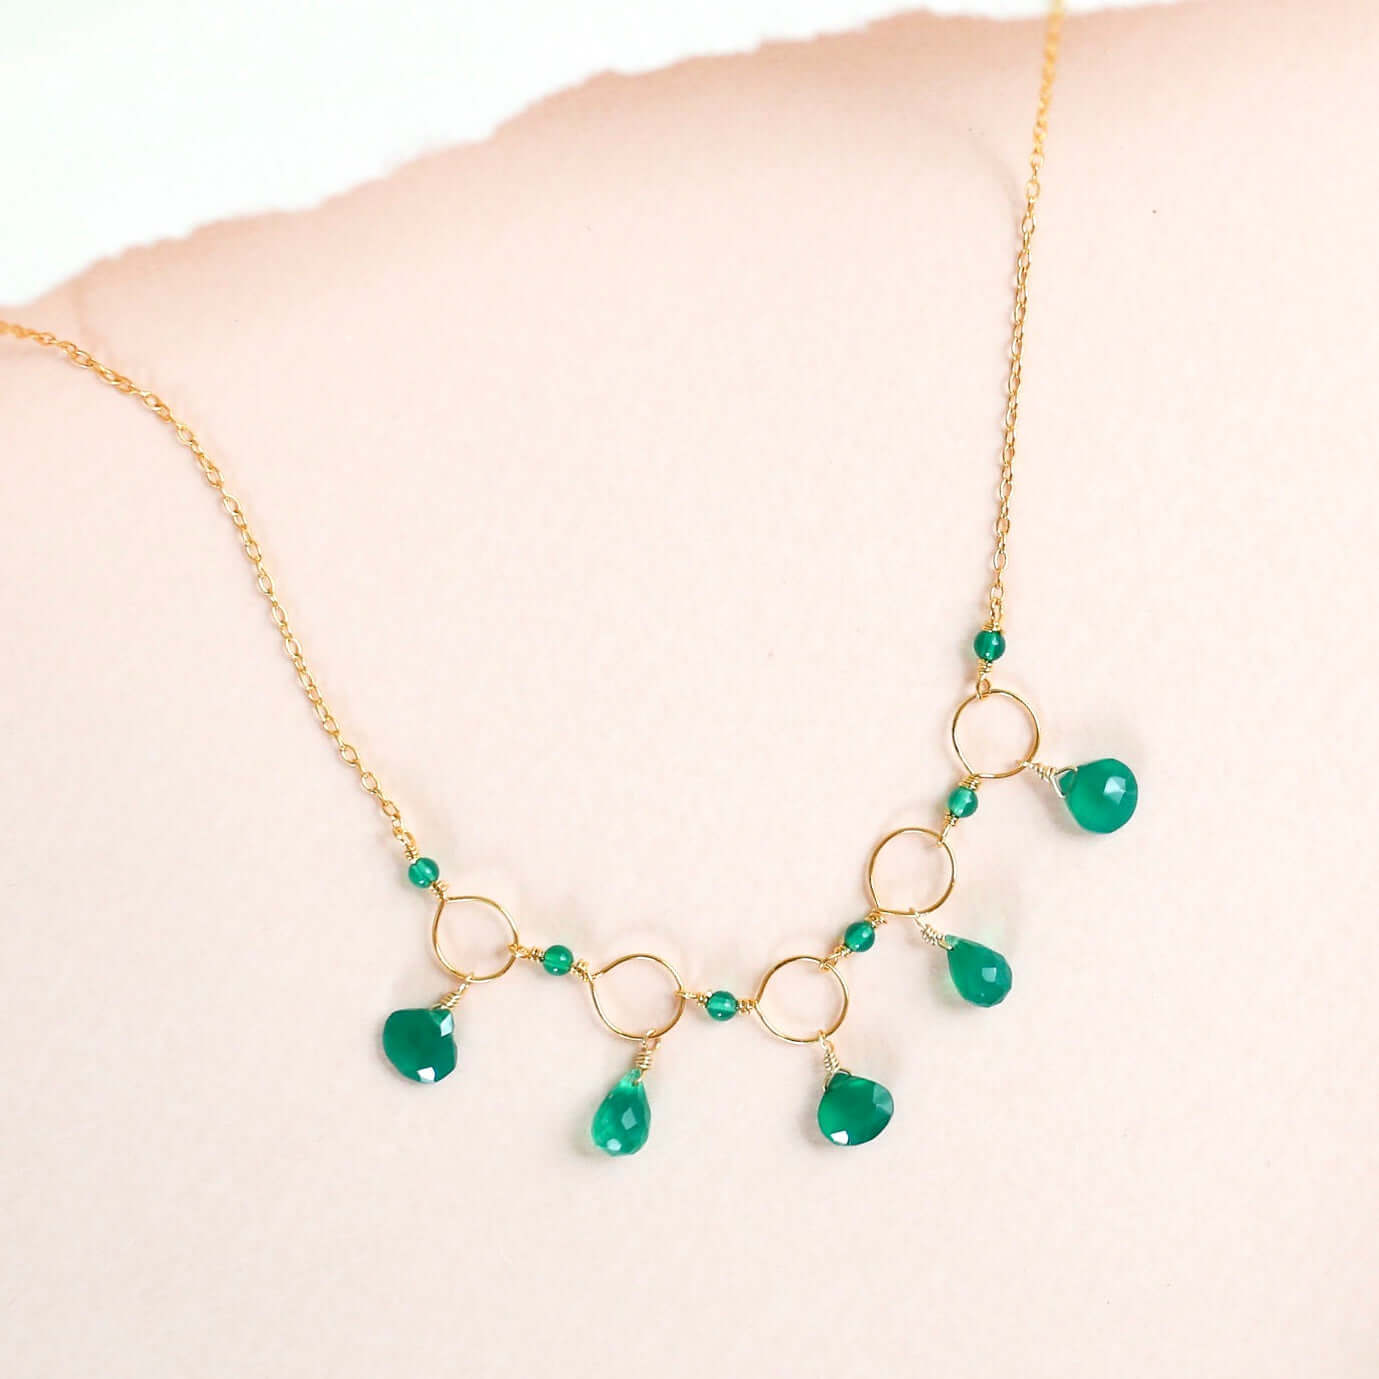 Adjustable Green Onyx Gemstone Gold  Chain Necklace